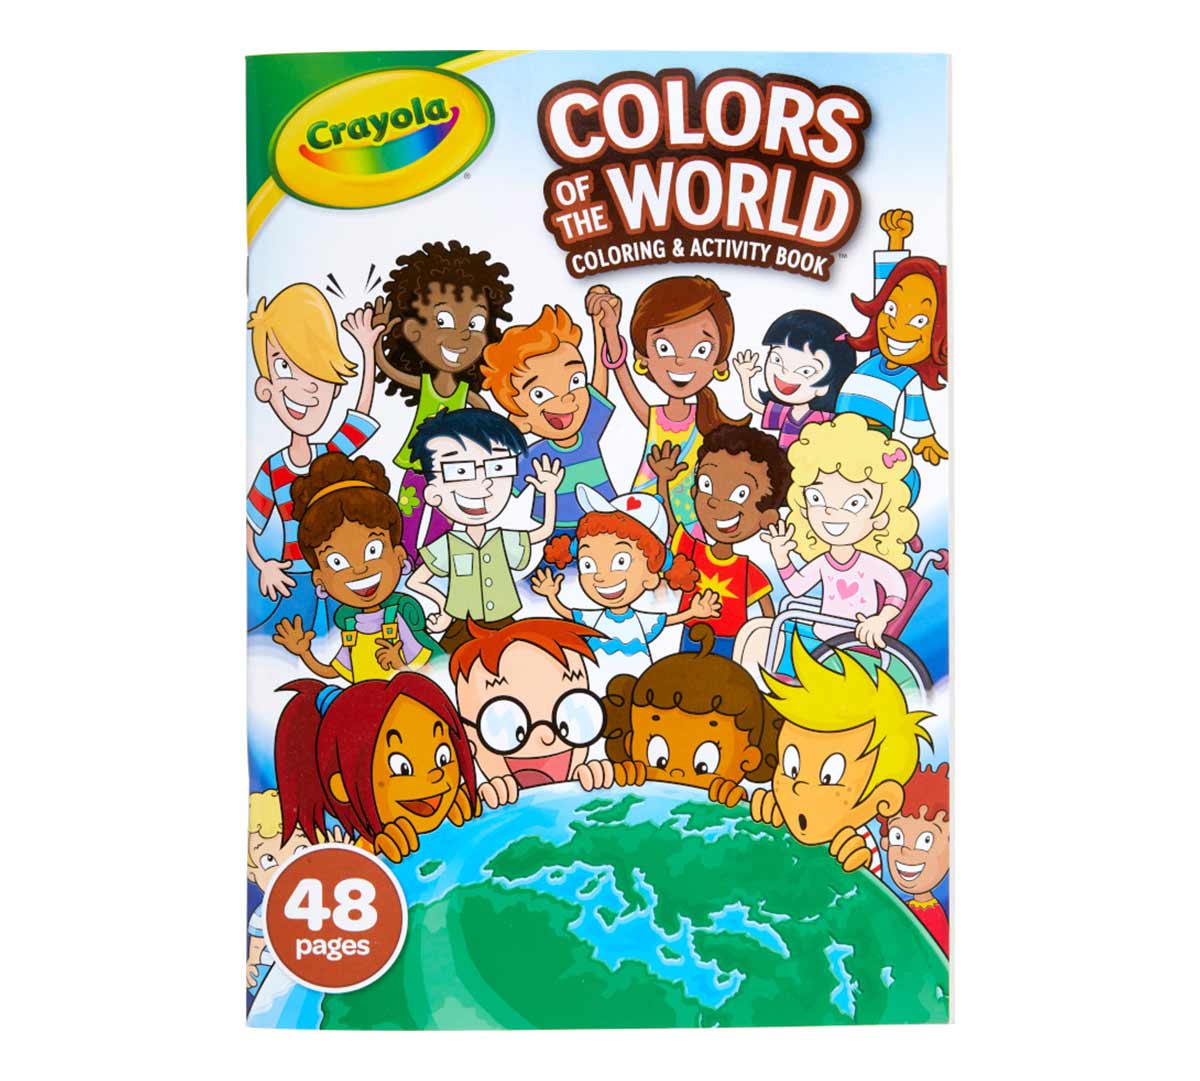 Colors of the World Coloring Book, 20 Pages   Crayola.com   Crayola